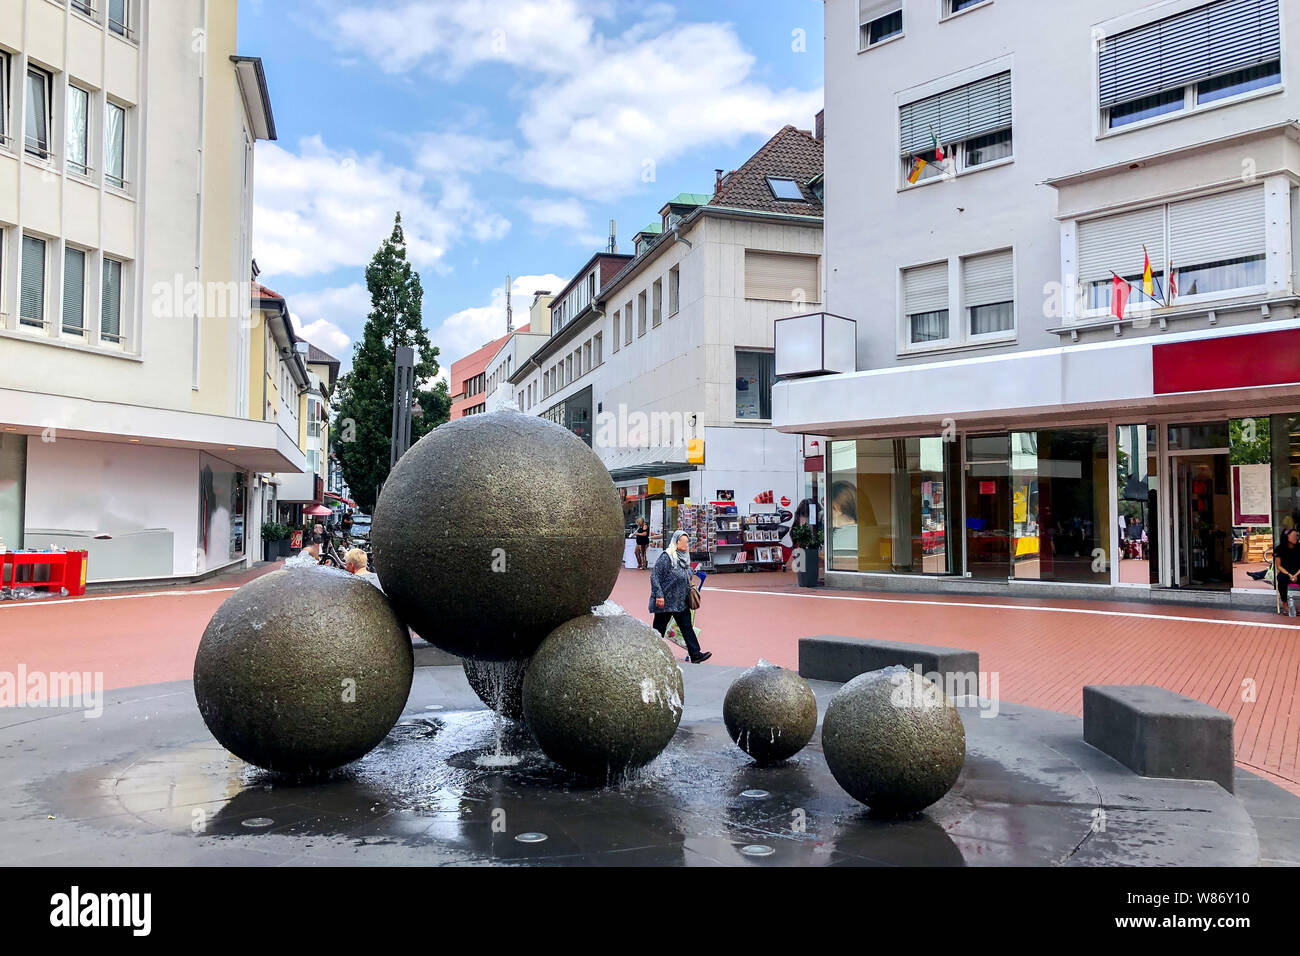 Fountain in Giessen, Germany Stock Photo